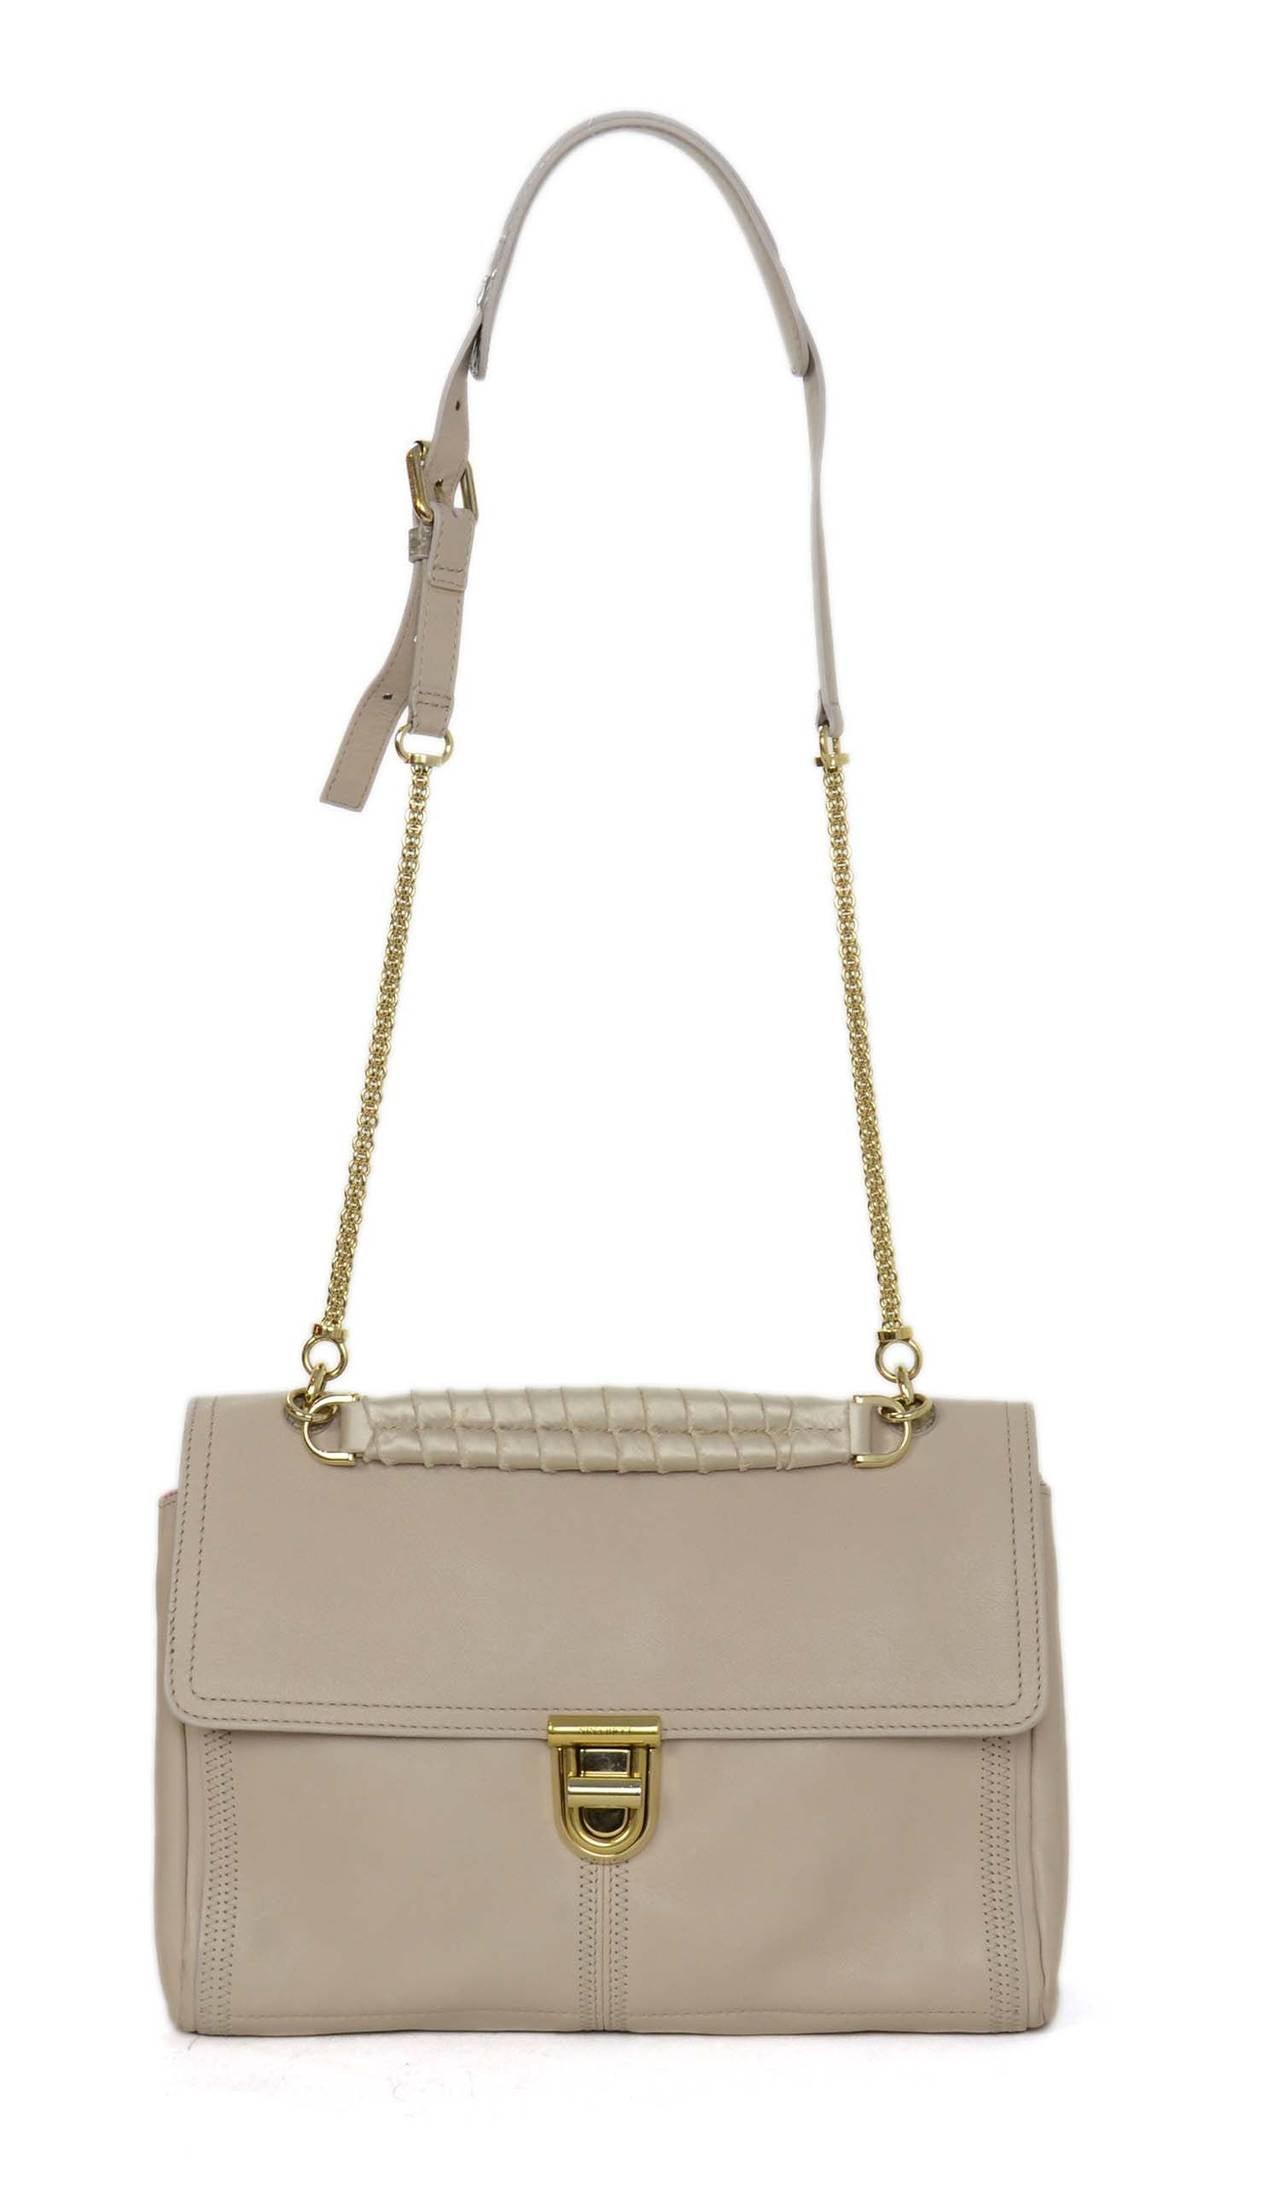 NINA RICCI Blush Leather ASAP Satchel Bag

    Made in: Italy
    Color: Blush pink
    Hardware: Antiqued gold
    Materials: Smooth leather
    Lining: Pink textile lining
    Closure/opening: Flap with a twist lock
    Exterior Pockets: